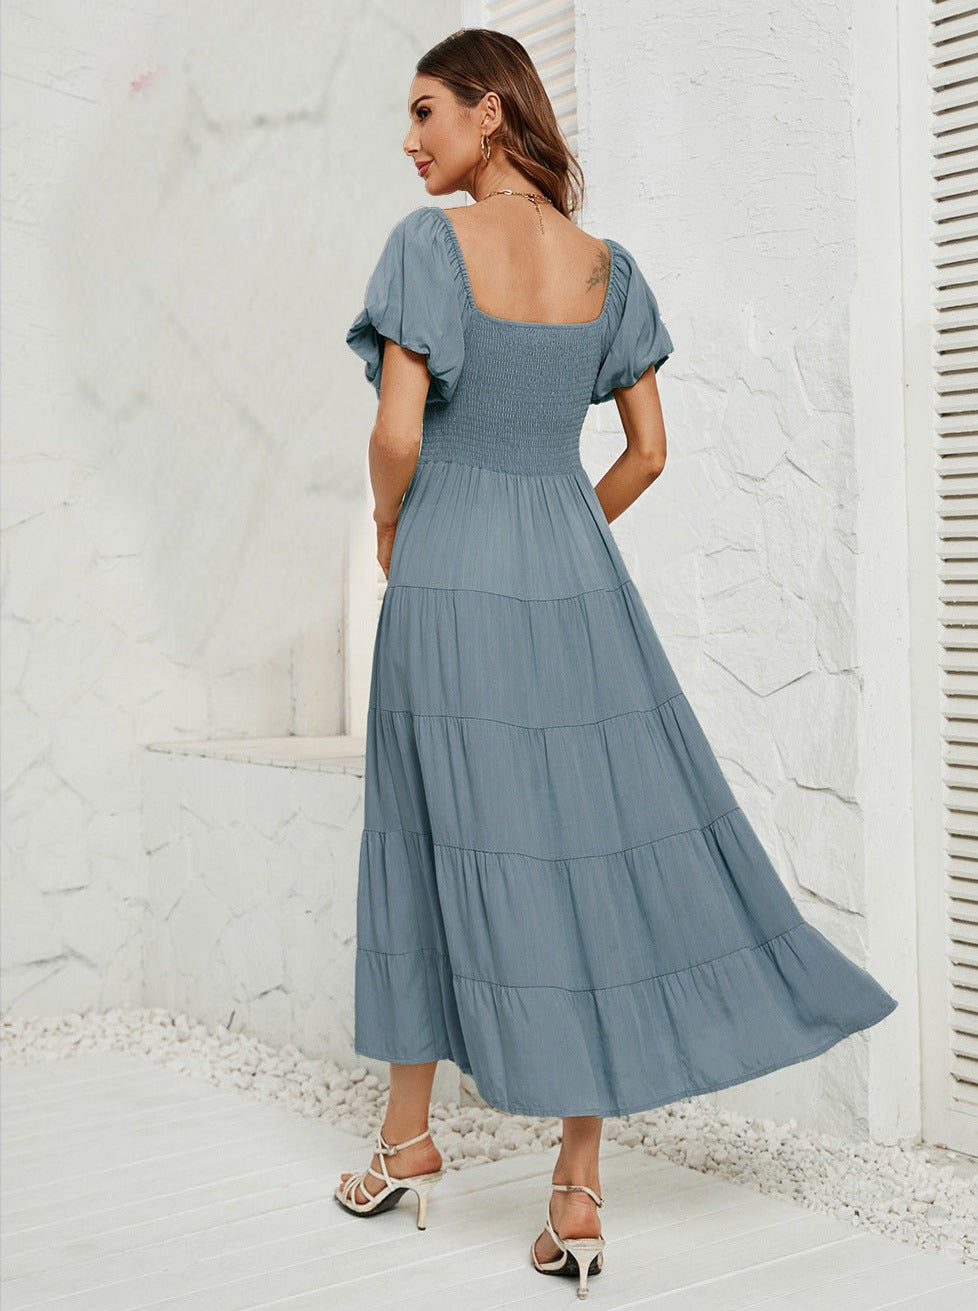 Grey and Blue High Waist Bubble Sleeve Square Neck Maxi Dress